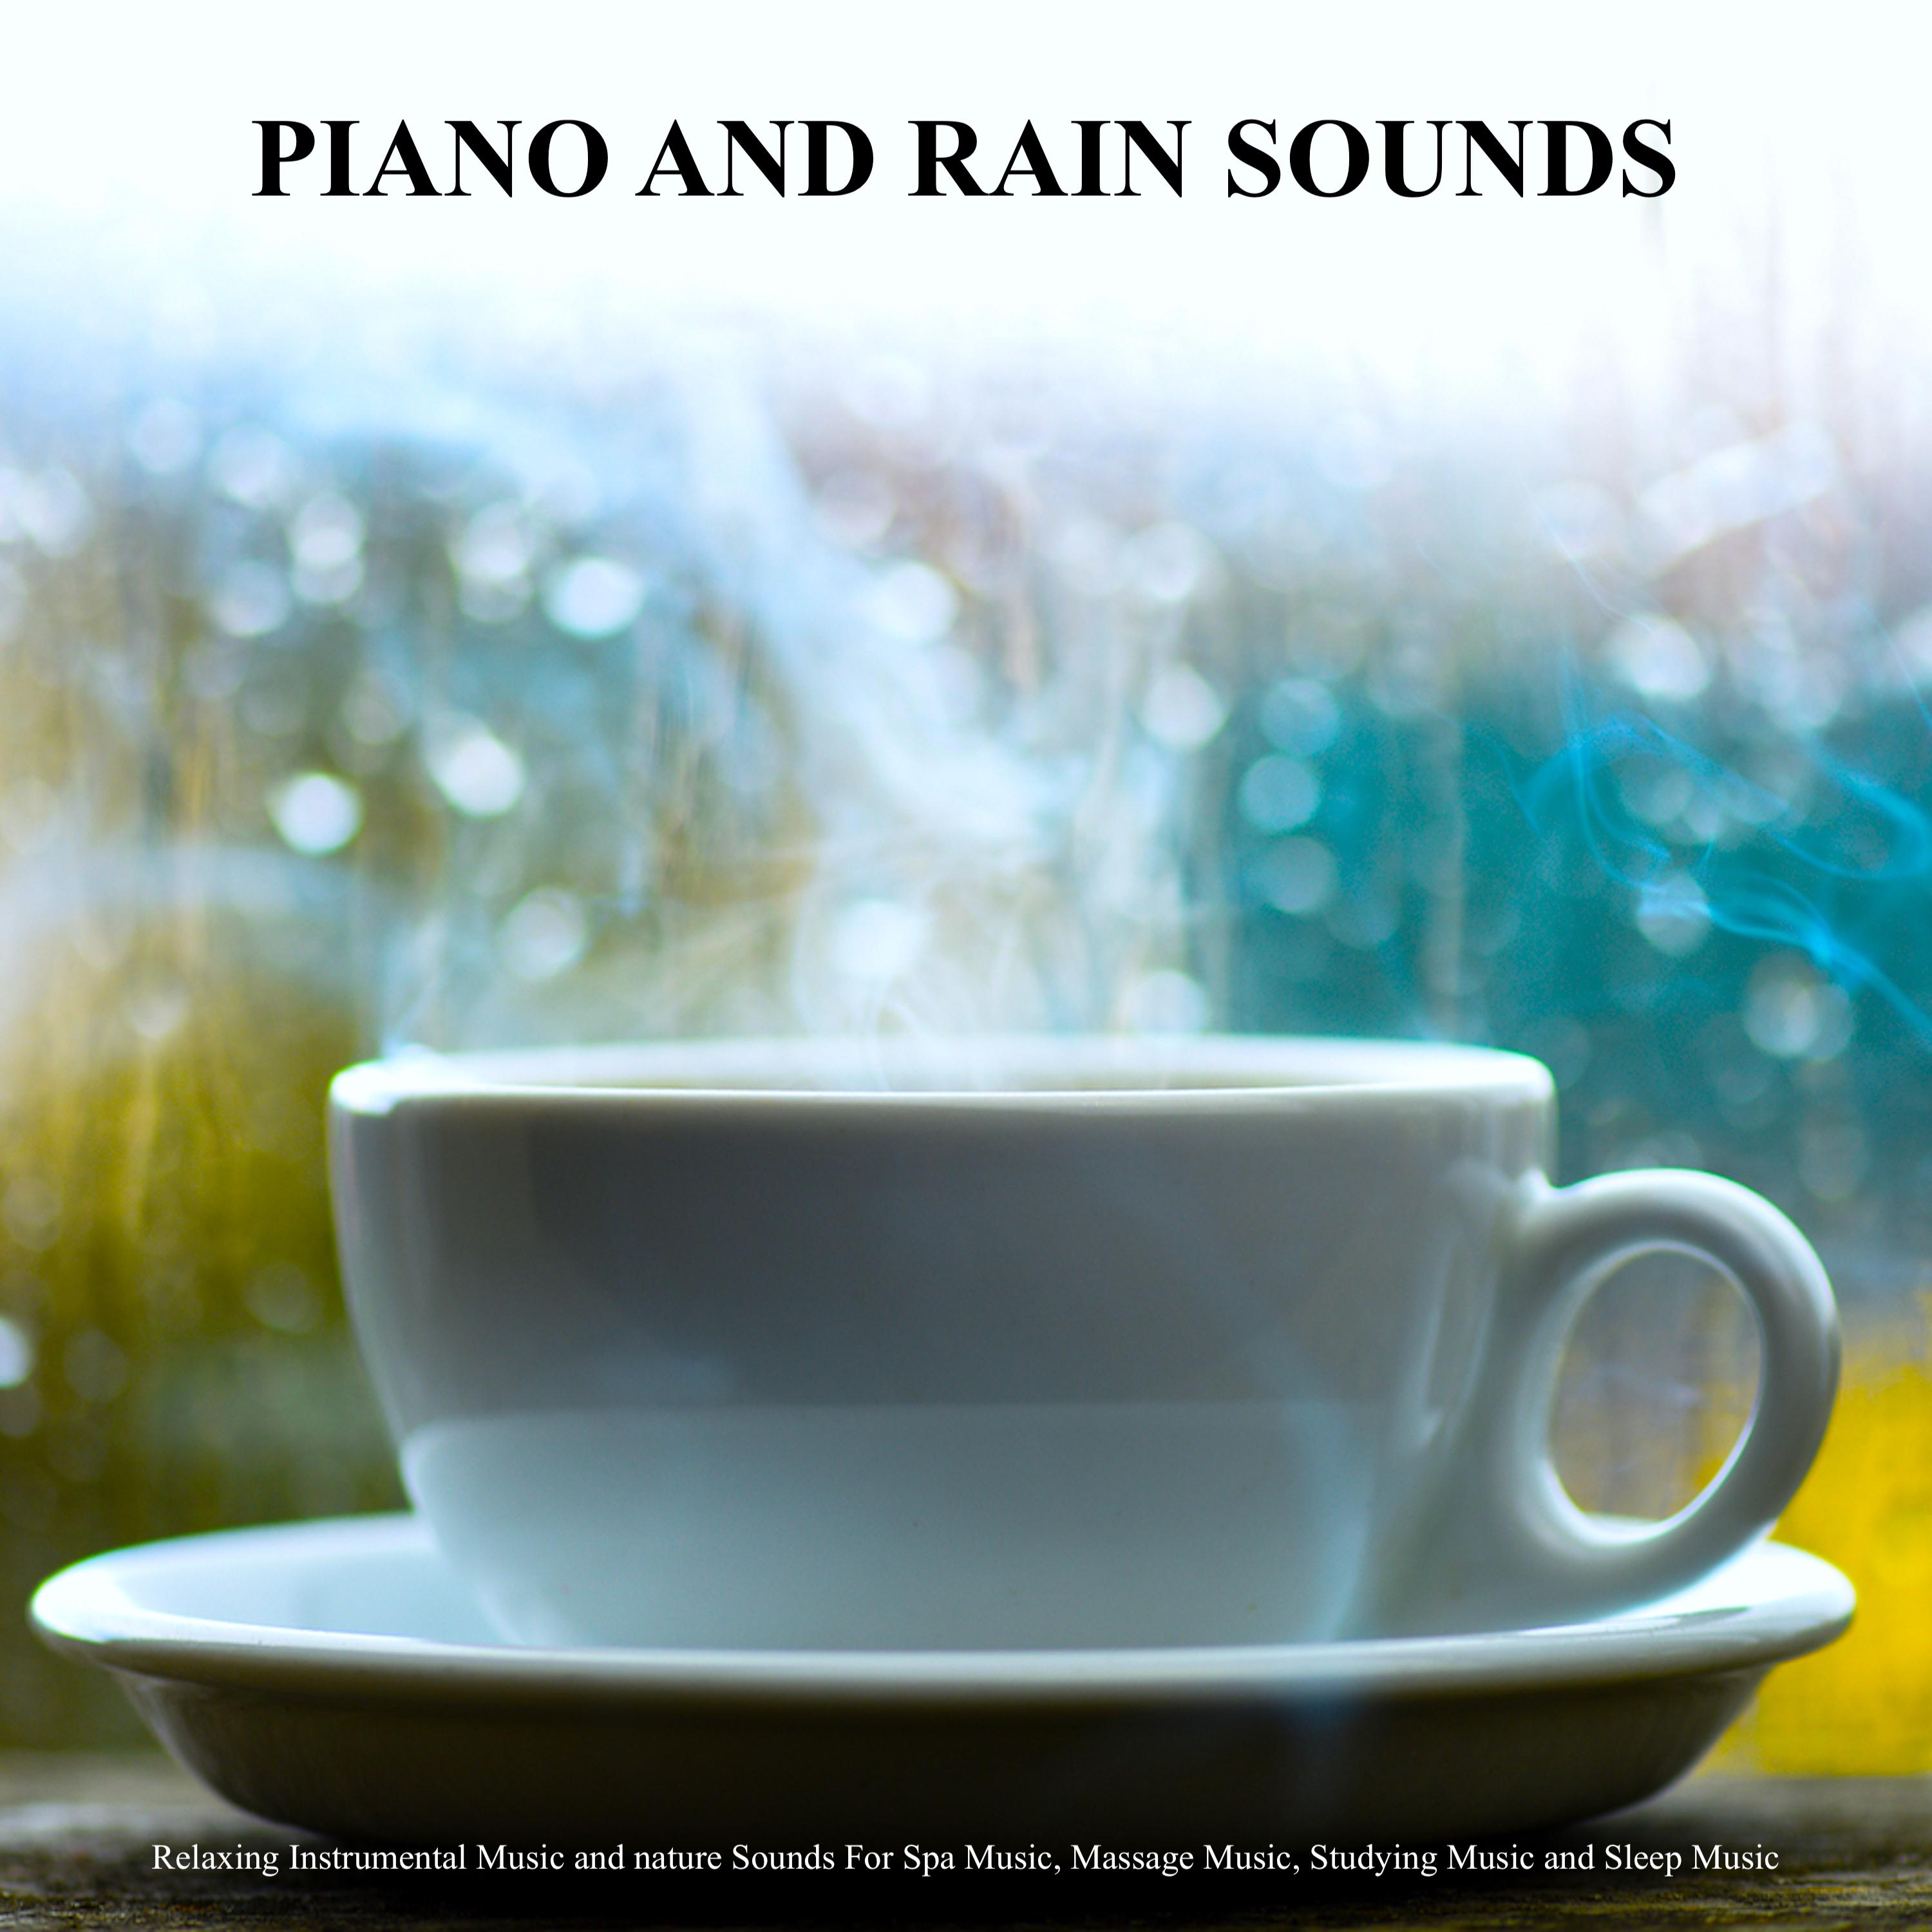 Tranquil Relaxing Piano Music with Rain Sounds